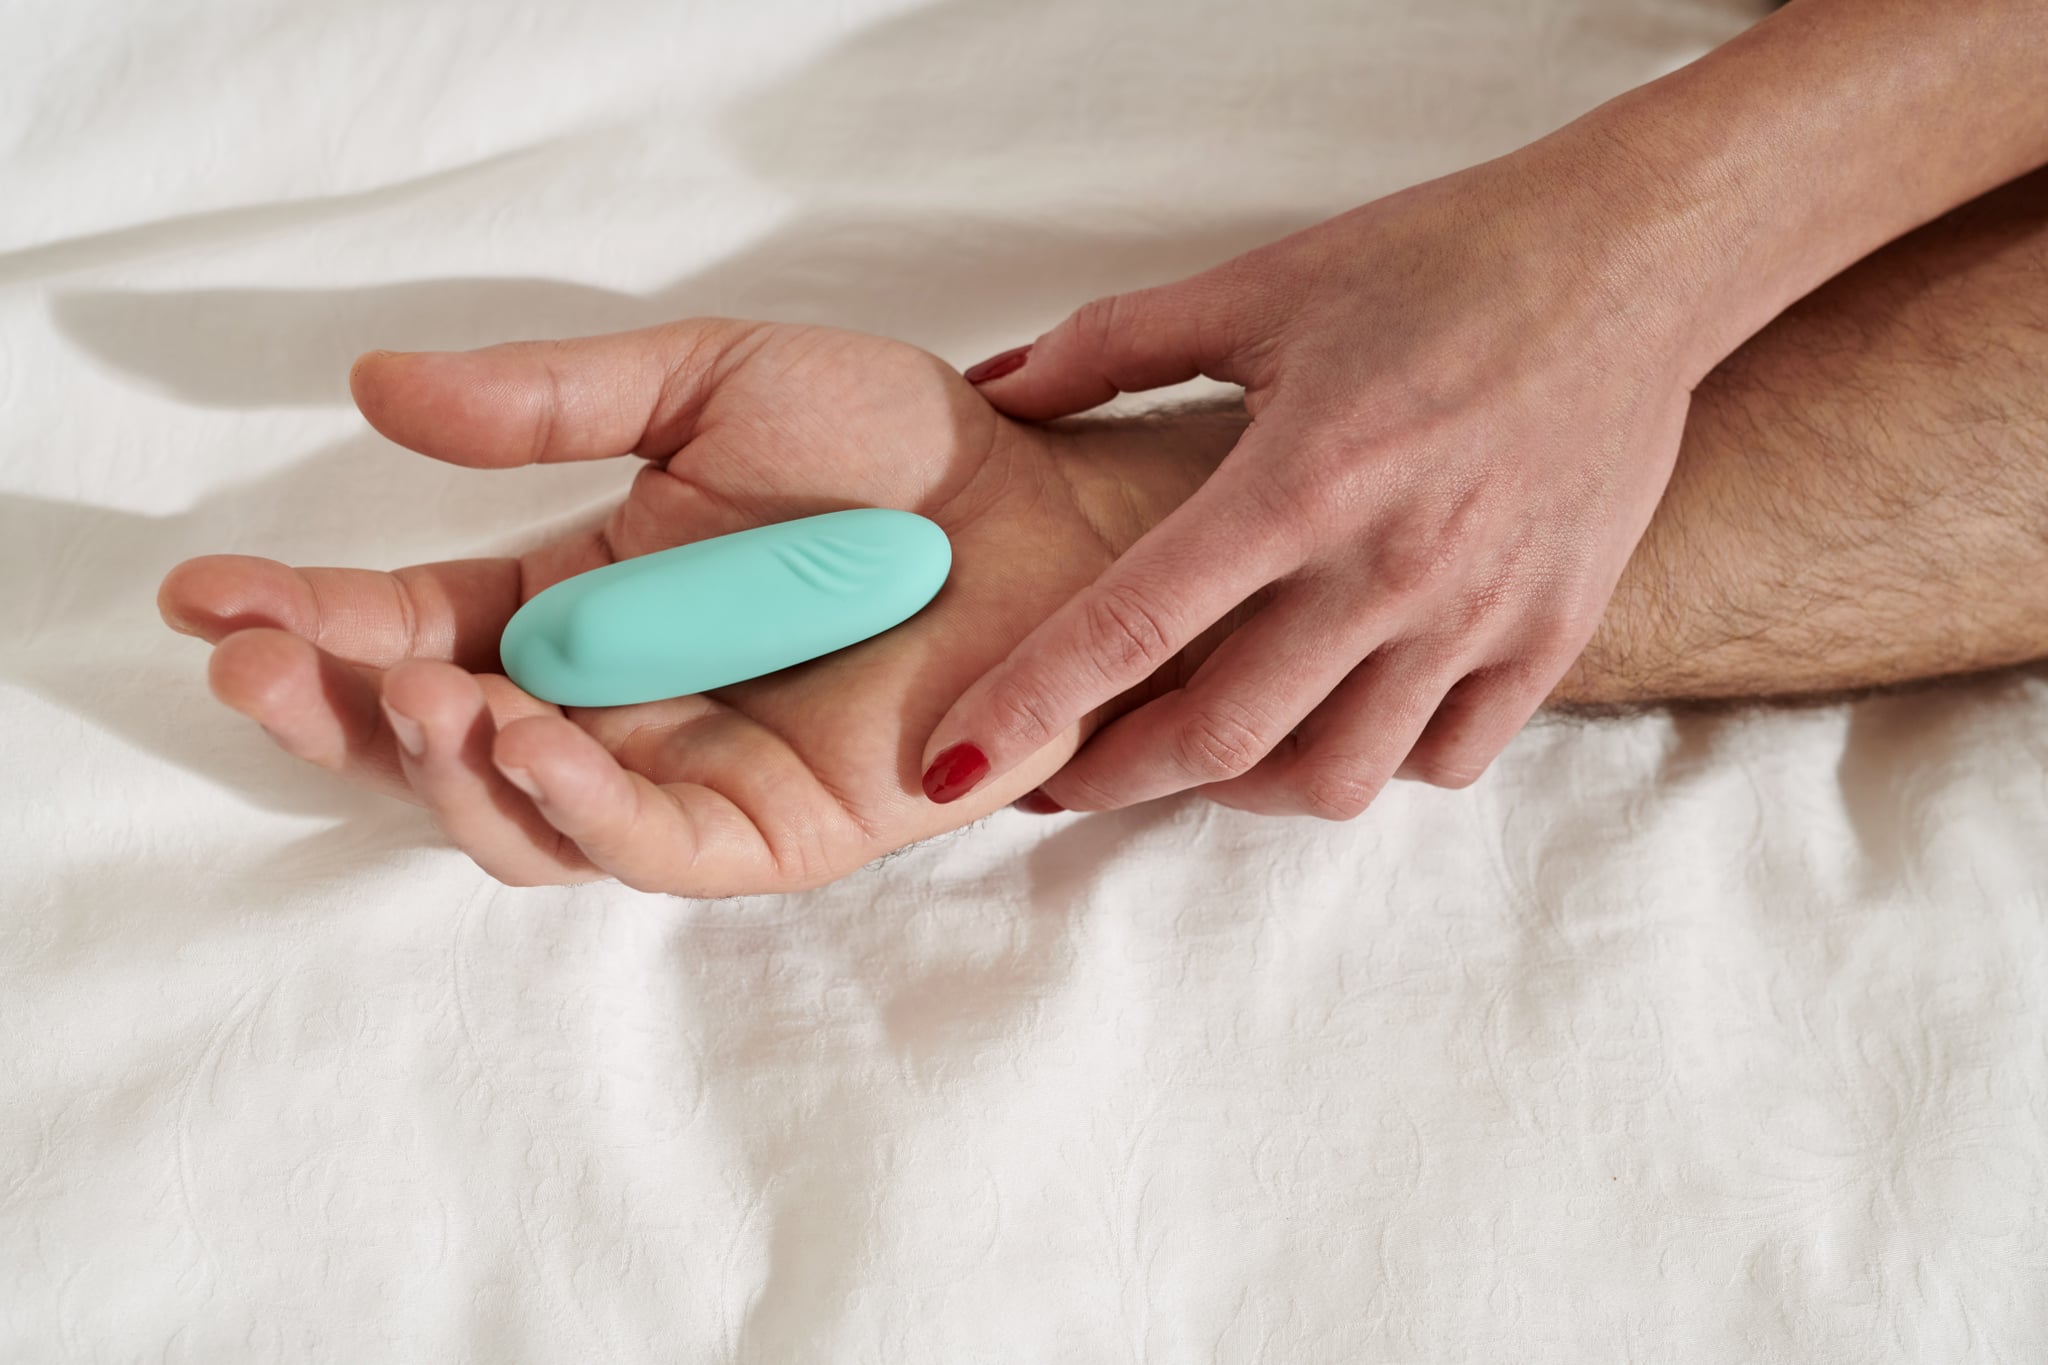 7 Expert Tips on How to Use a Vibrator With Your Partner